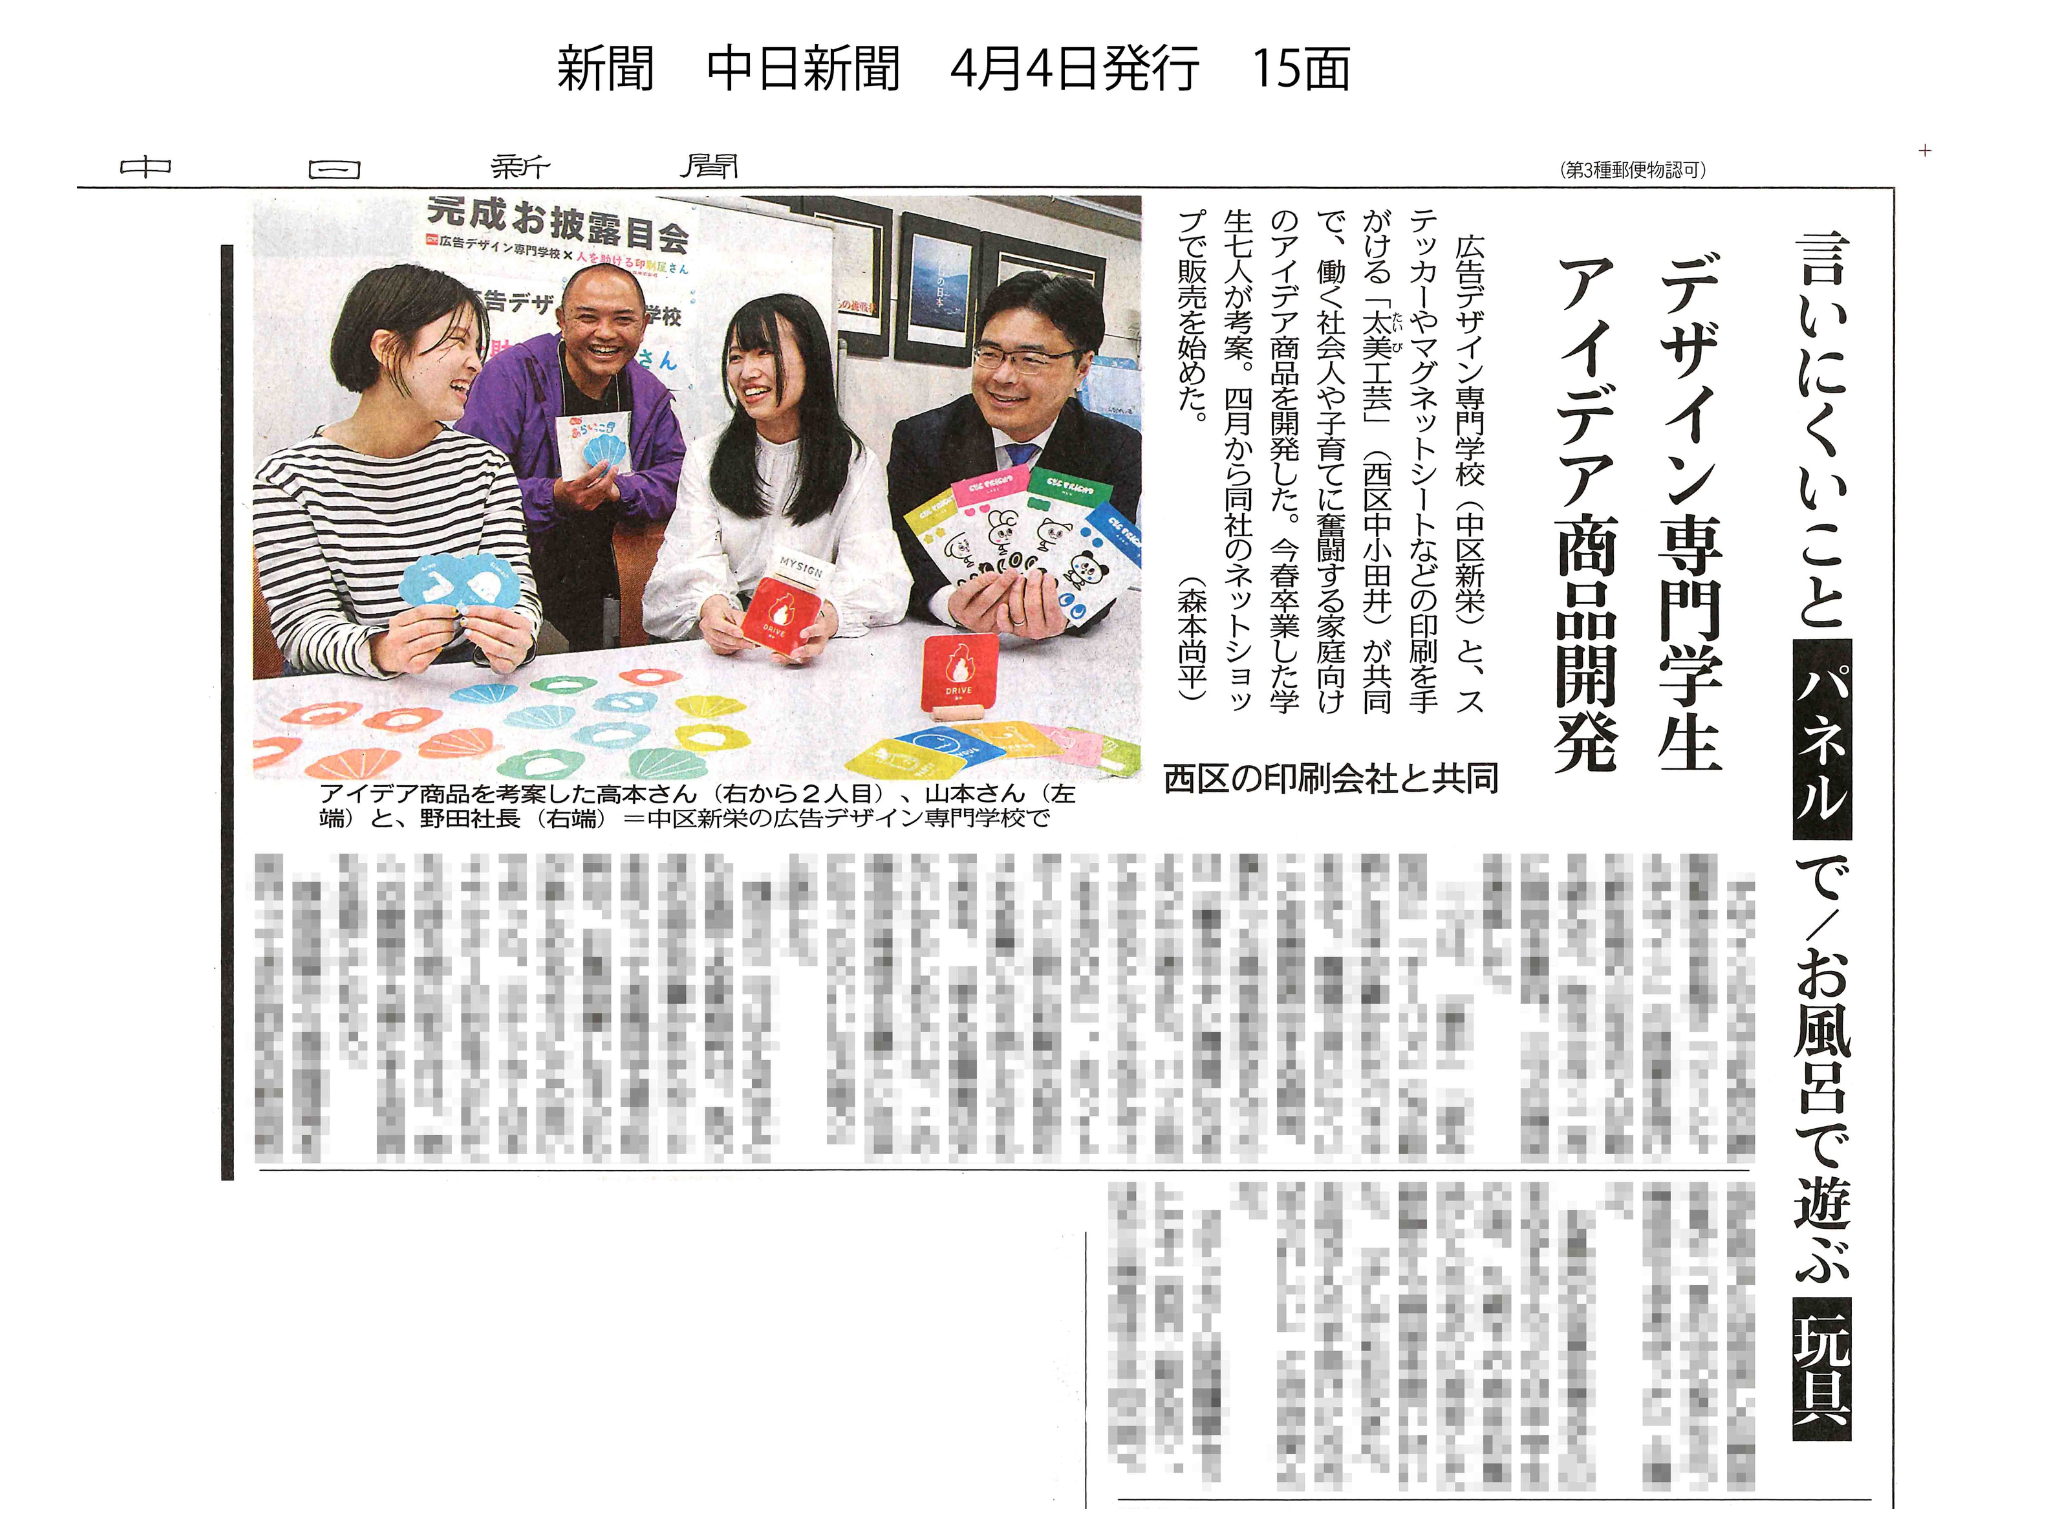 You are currently viewing 産学連携の取り組みが新聞4紙に掲載されました！【広告デザイン専門学校＆太美工芸】(2023.3)